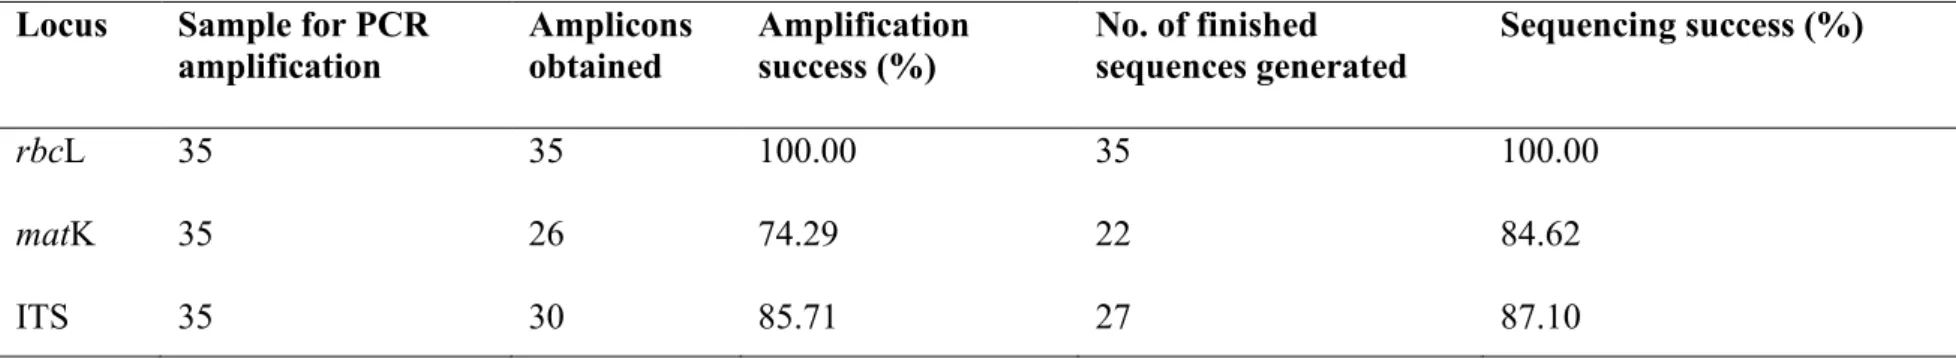 Table 4.2.1: Amplification and sequencing success rate of the three candidate loci for 35 local medicinal plants   Locus  Sample for PCR 